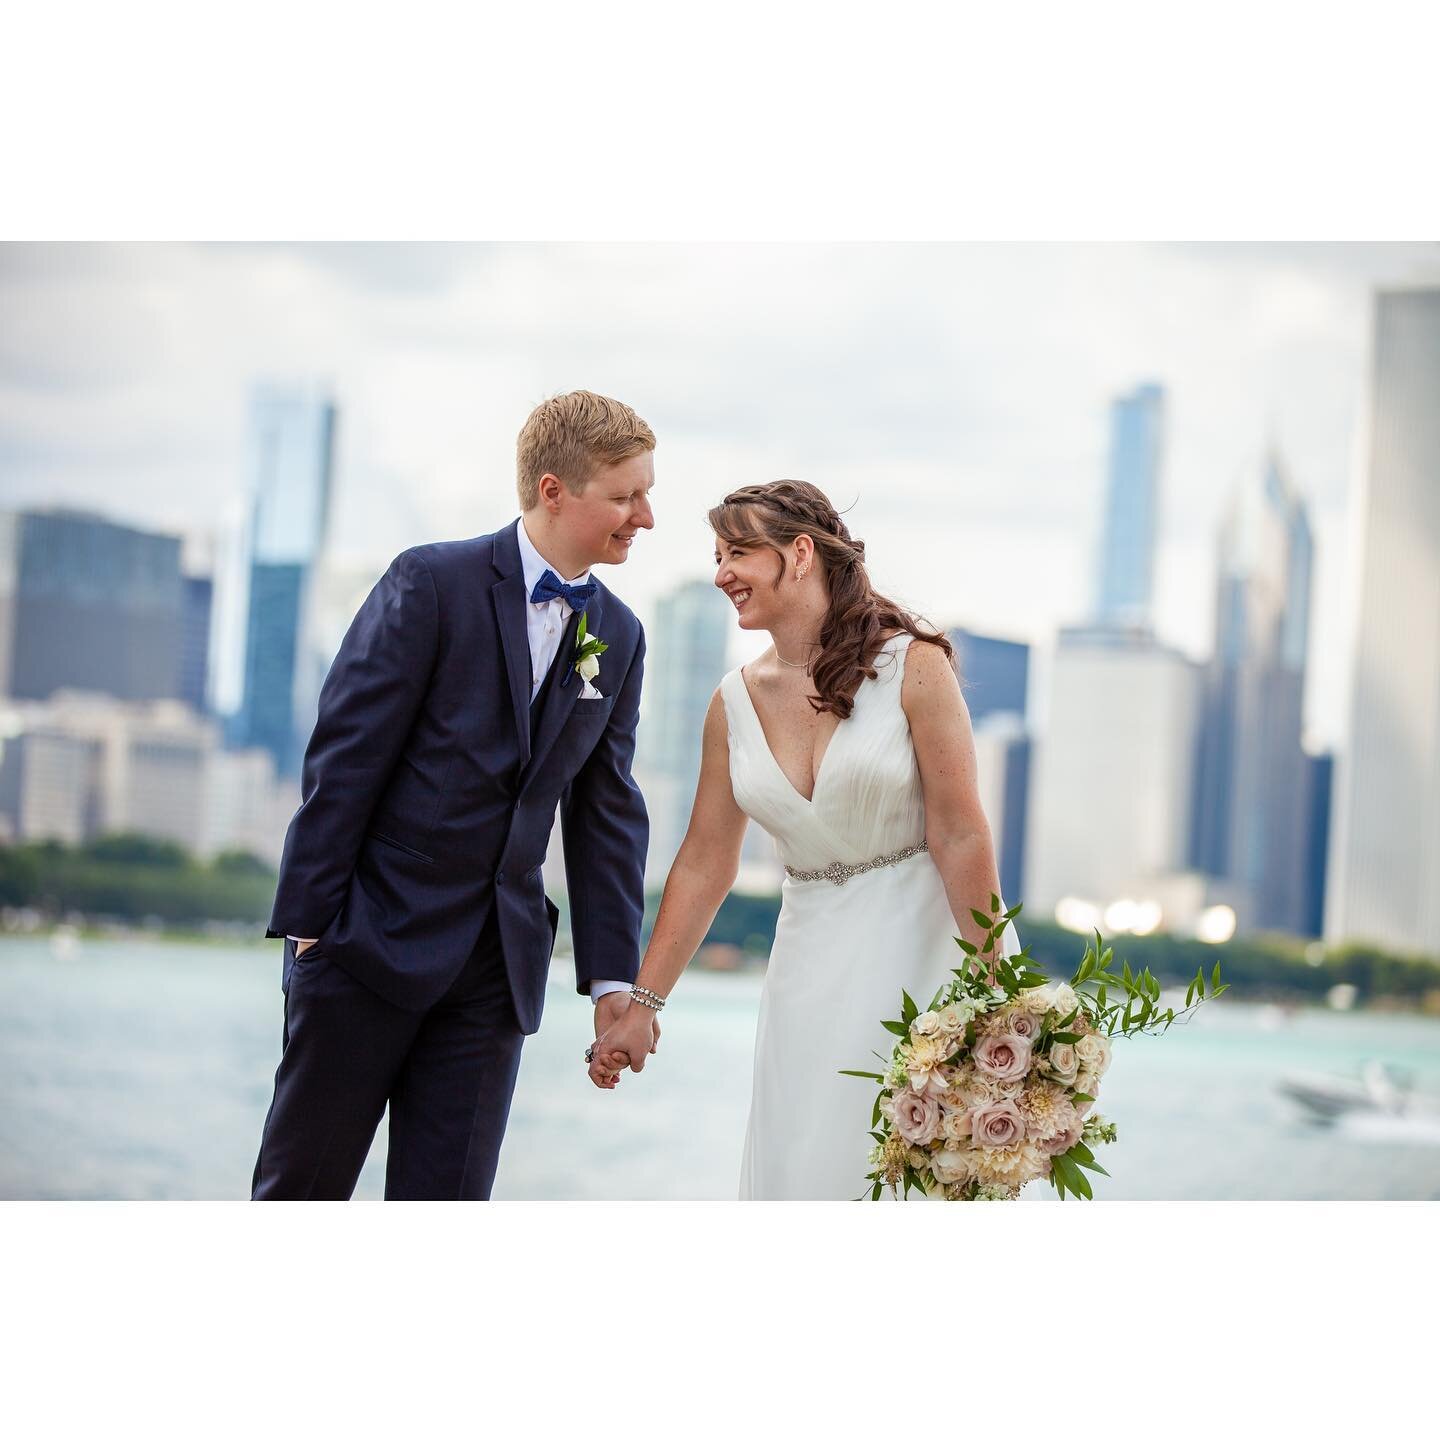 The lakefront on the most beautiful September Saturday! .
.
Hotel: @thegraychi 
Catering: @dabsolute_events 
Florals: @stevesflowermarket 
Decor: @art_imagination 
Cake: @chicagocustomcakes 
Coffee: @onthegojocoffee 
Linens: @fslinens 
Farm Tables: @